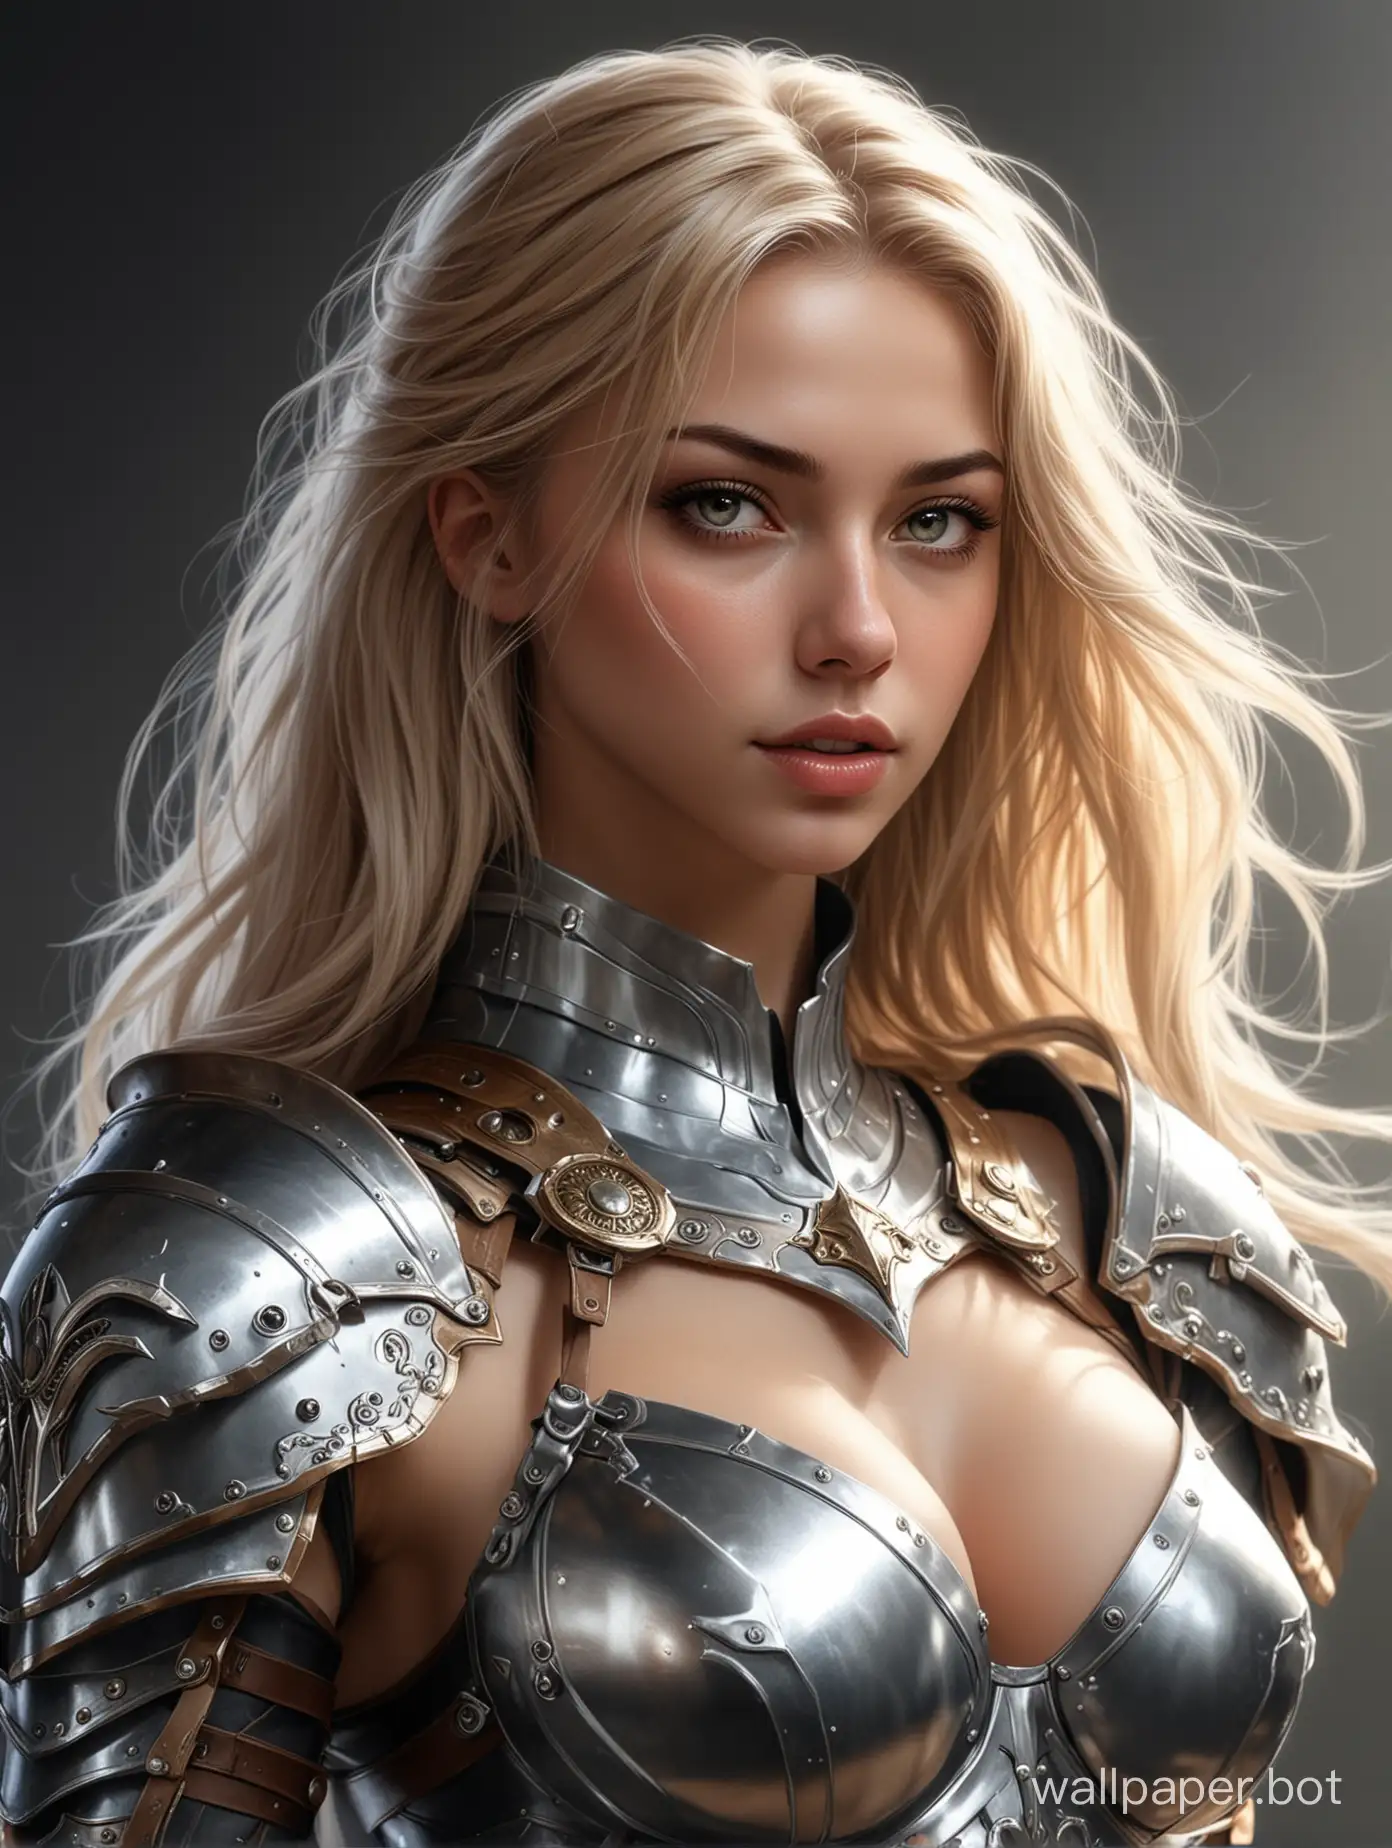 A sexual girl, with light hair, in sexual fantasy armor, realistic, clear and contrasting, high-quality drawing of the image and various details